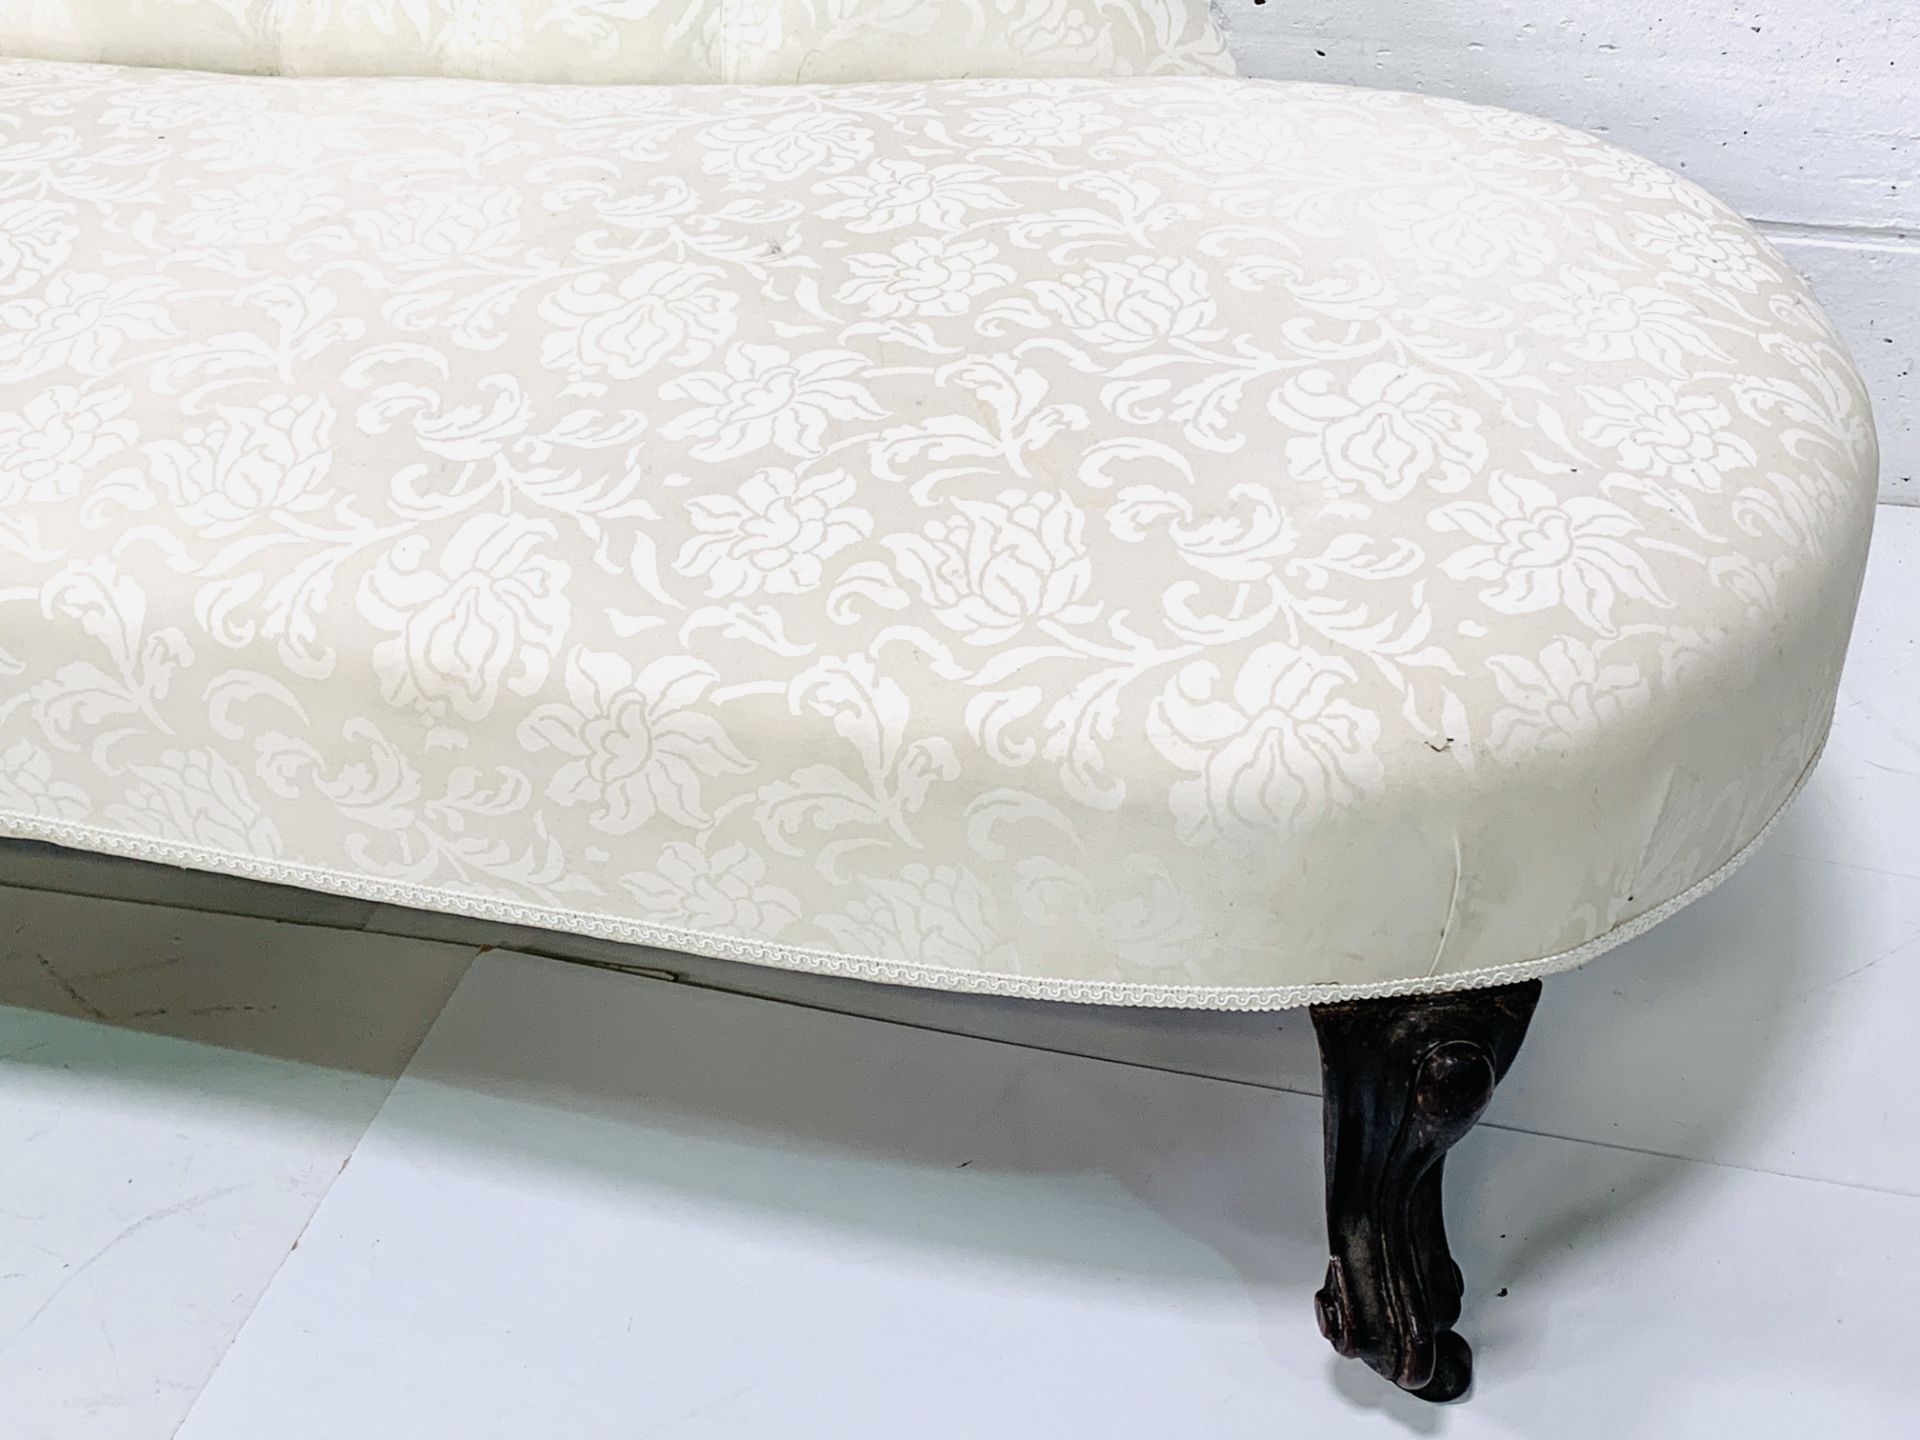 Victorian chaise longue in button back cream floral pattern upholstery - Image 4 of 4